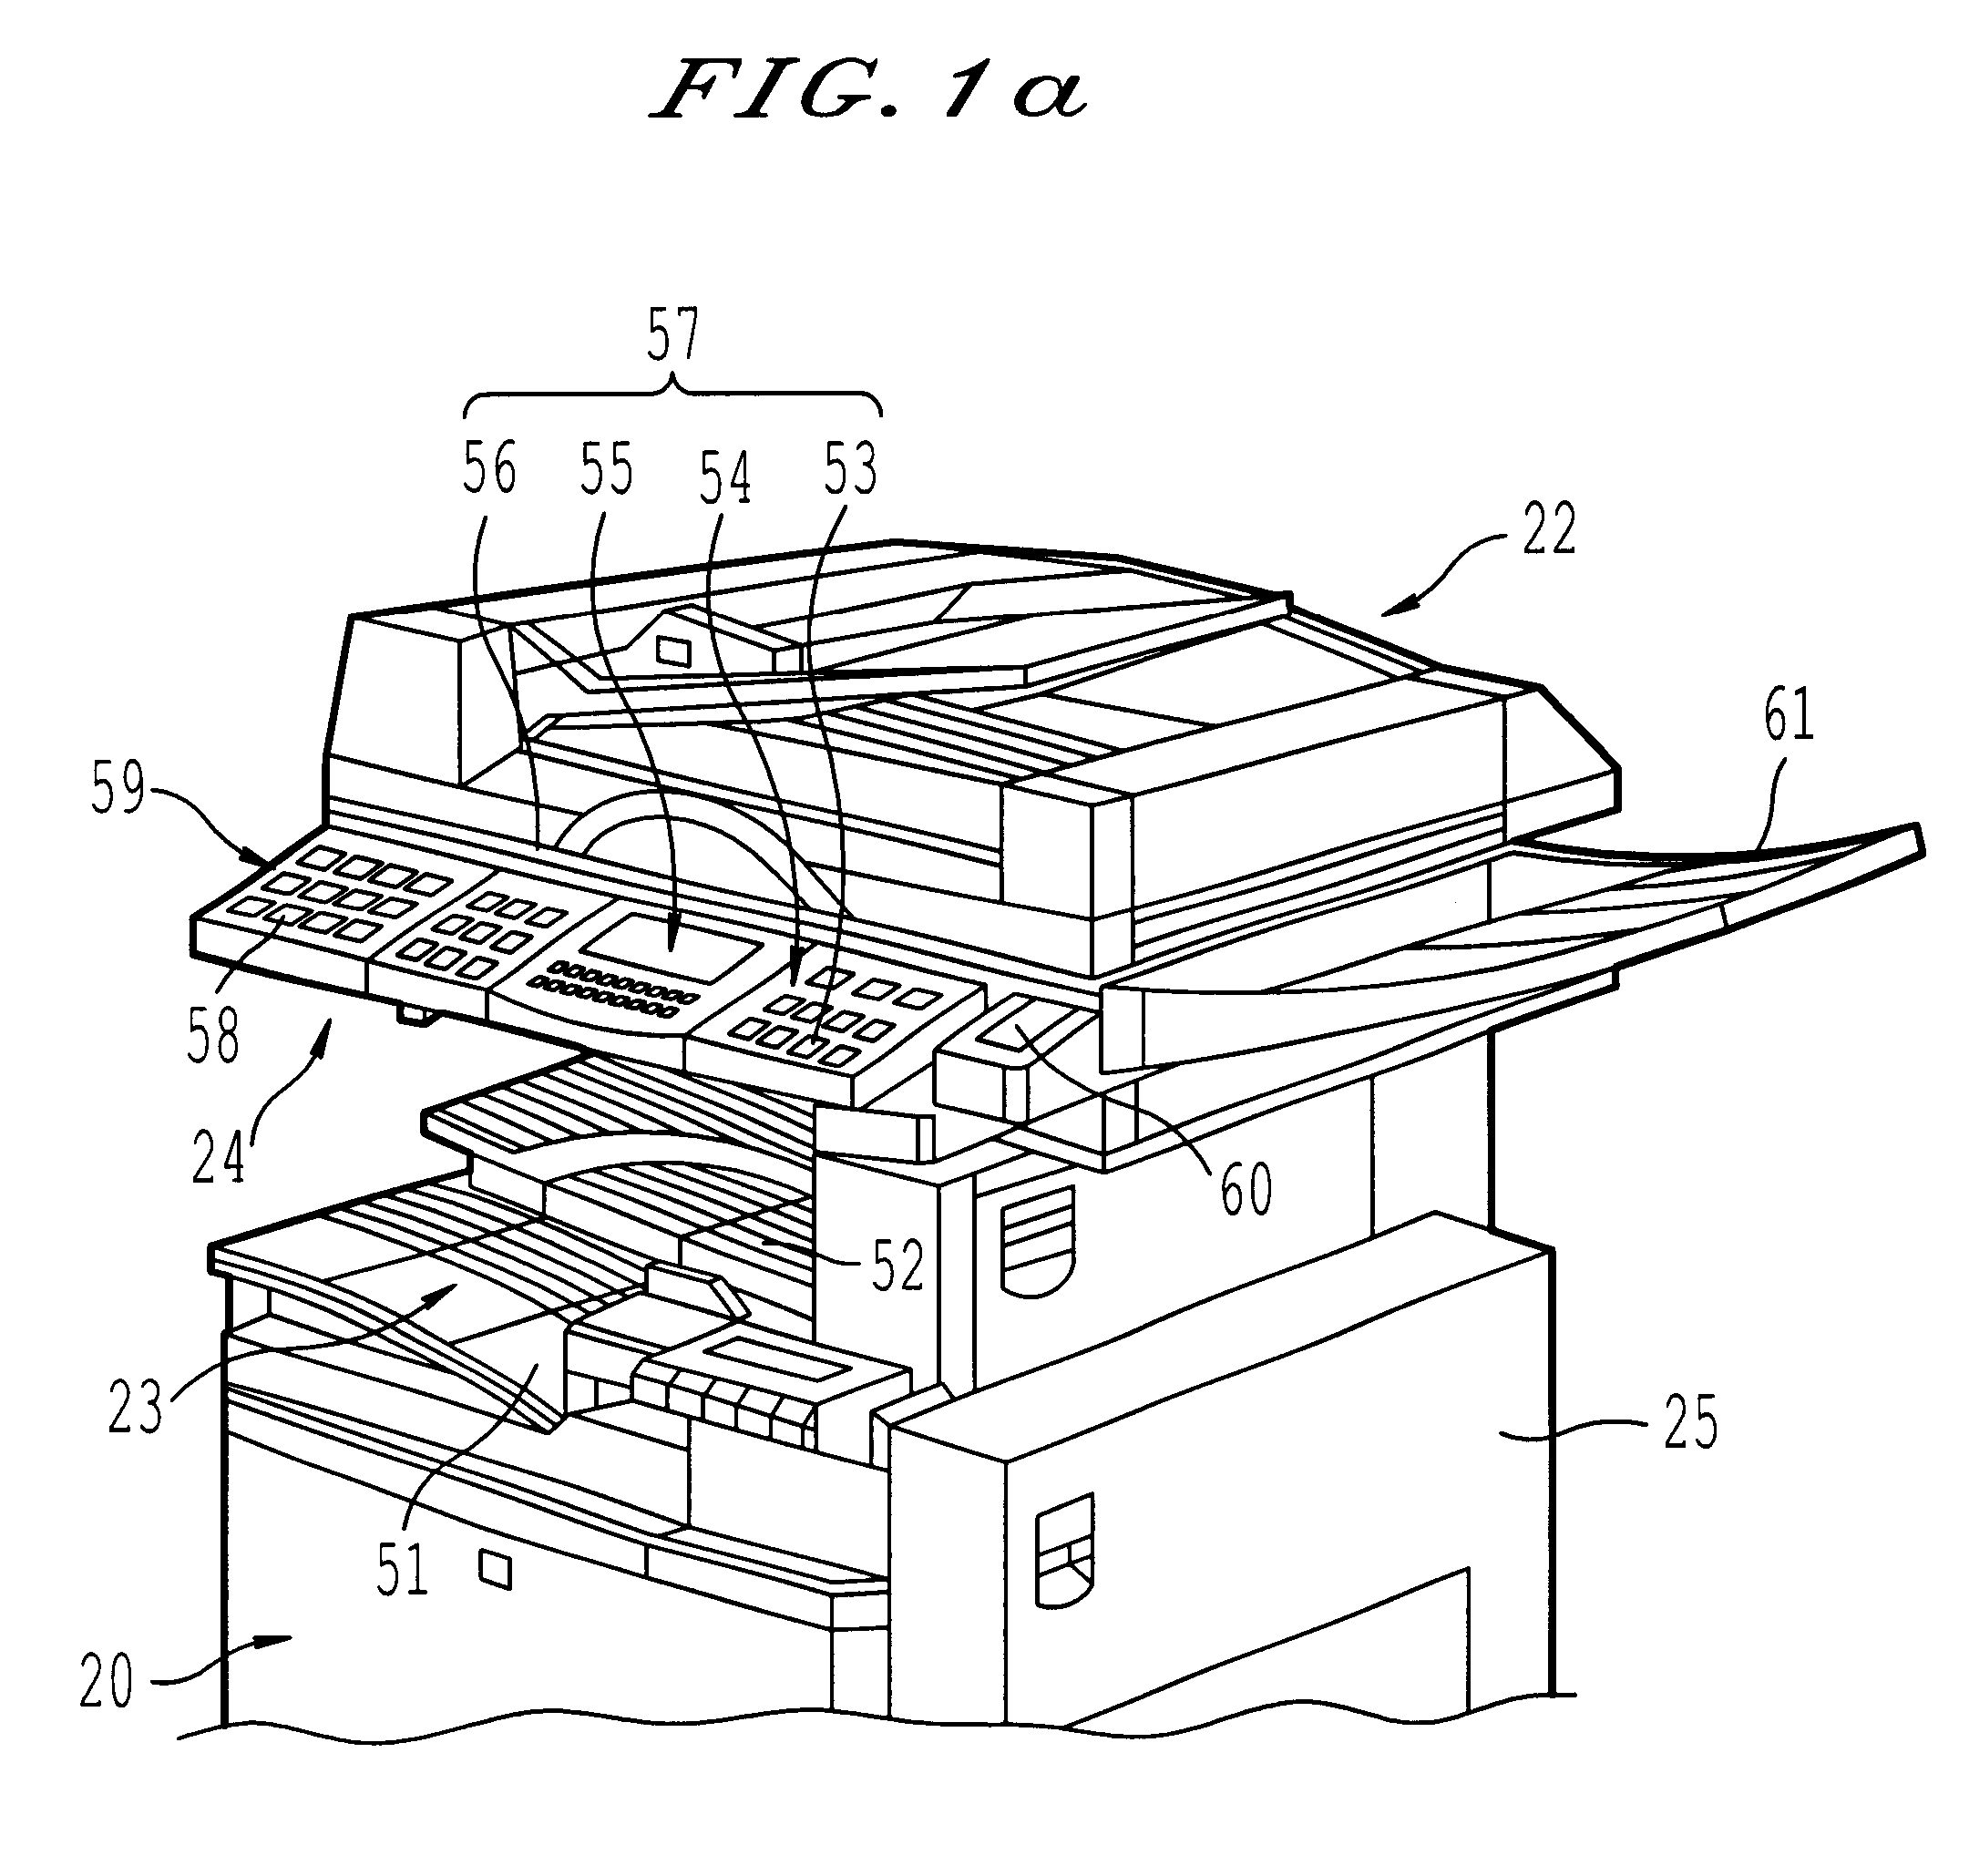 Multifunctional image forming apparatus having a covered main power switch